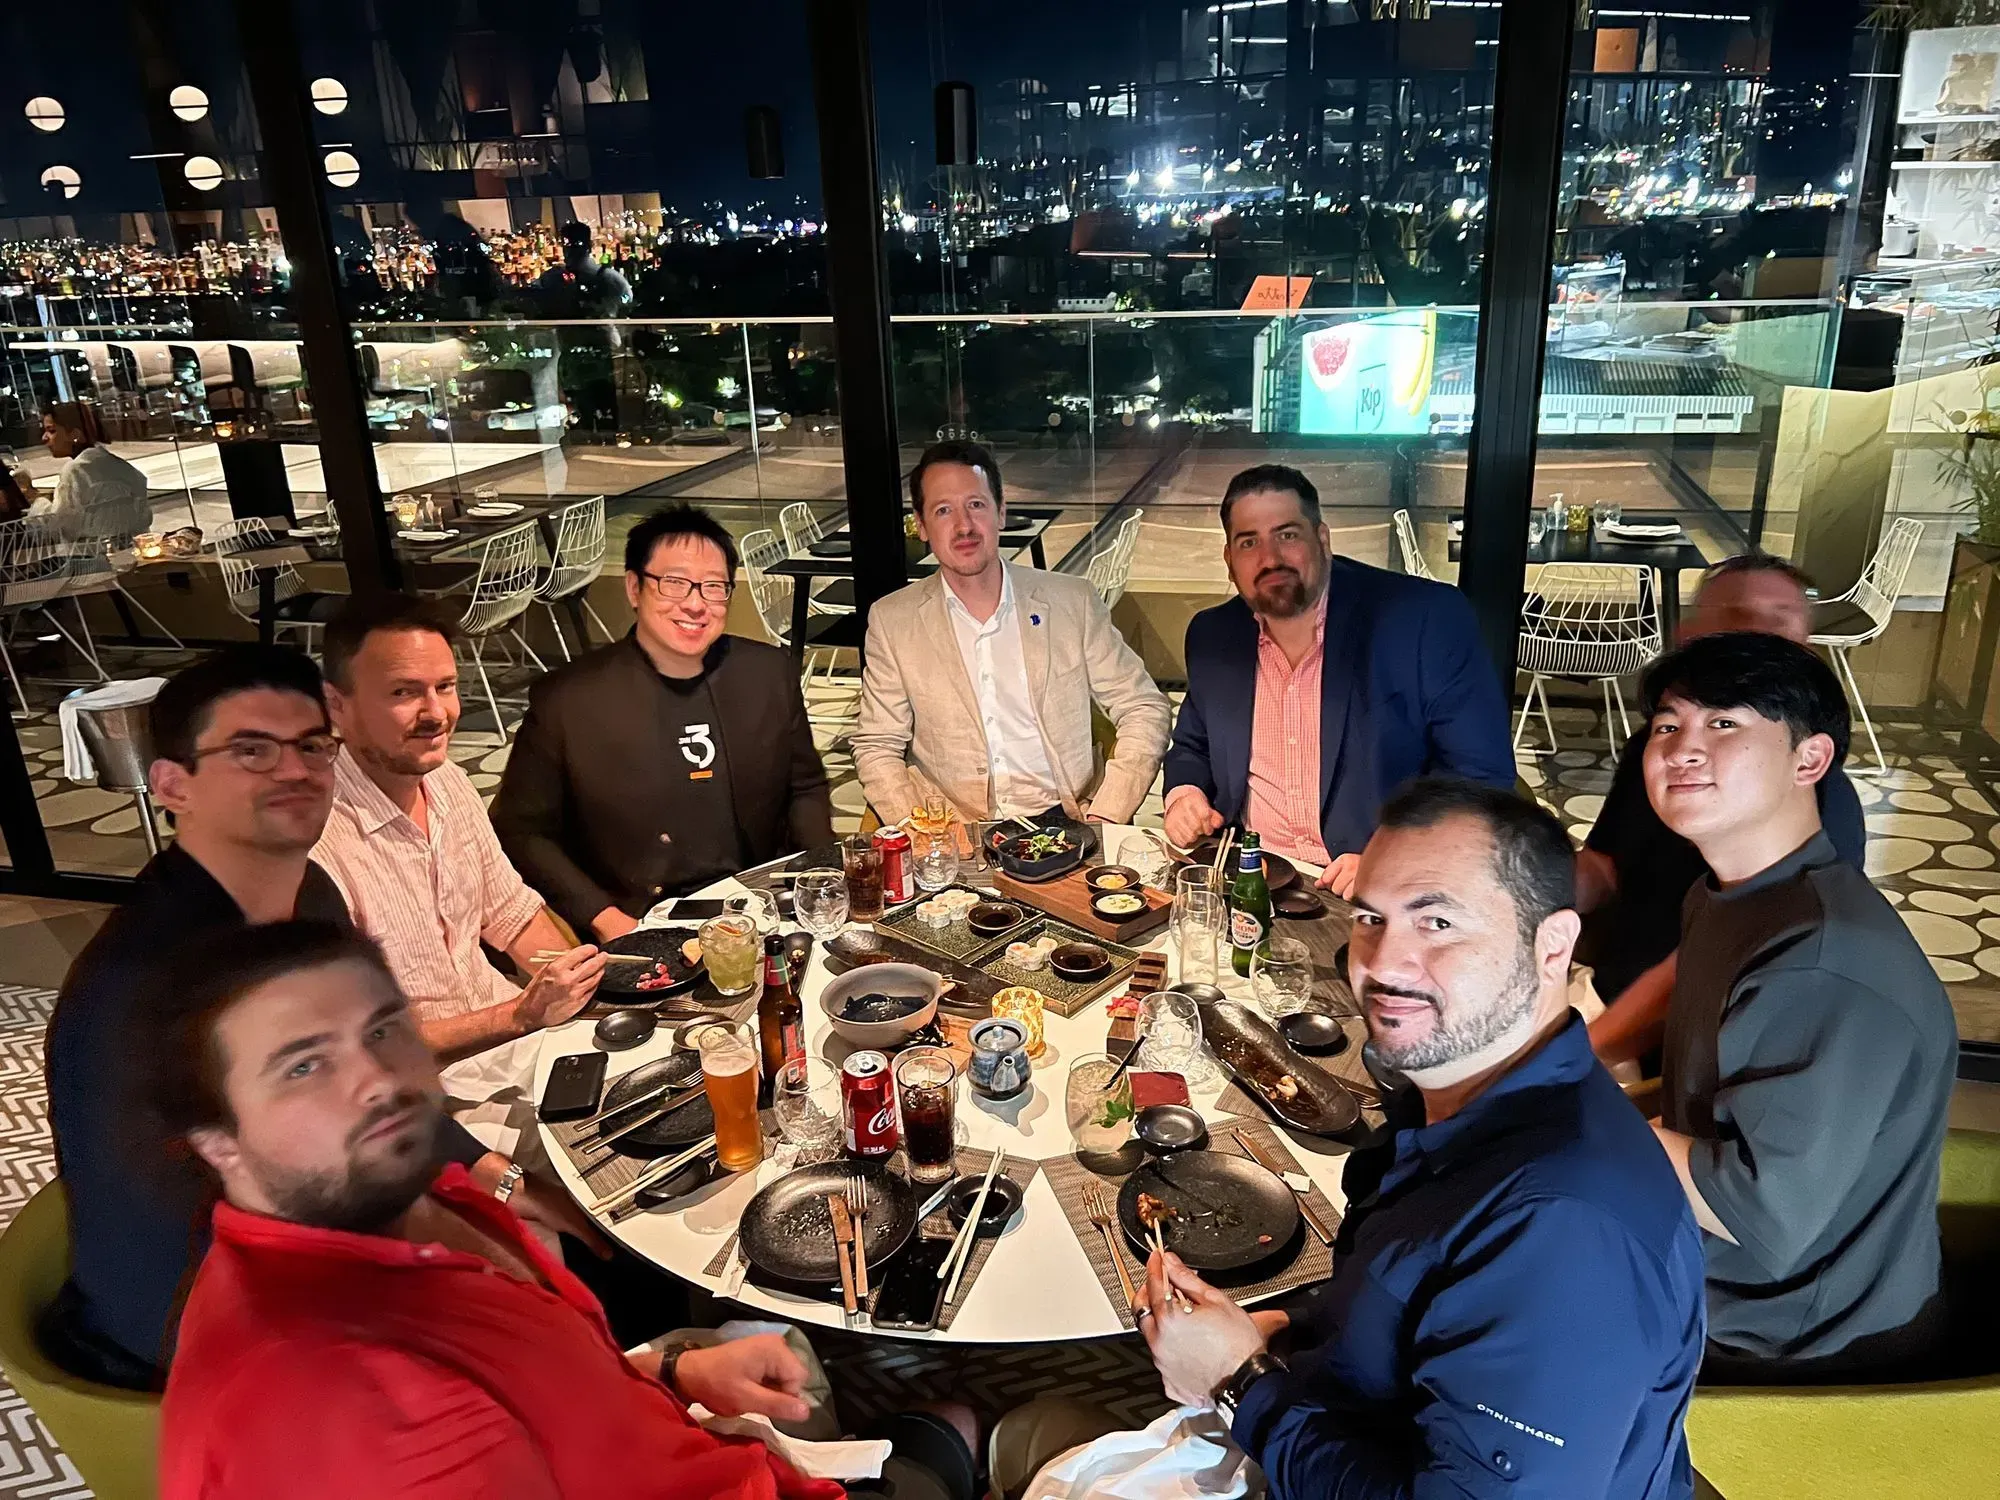 The JAN3 team and some Bitcoiners from Panama having dinner in El Salvador